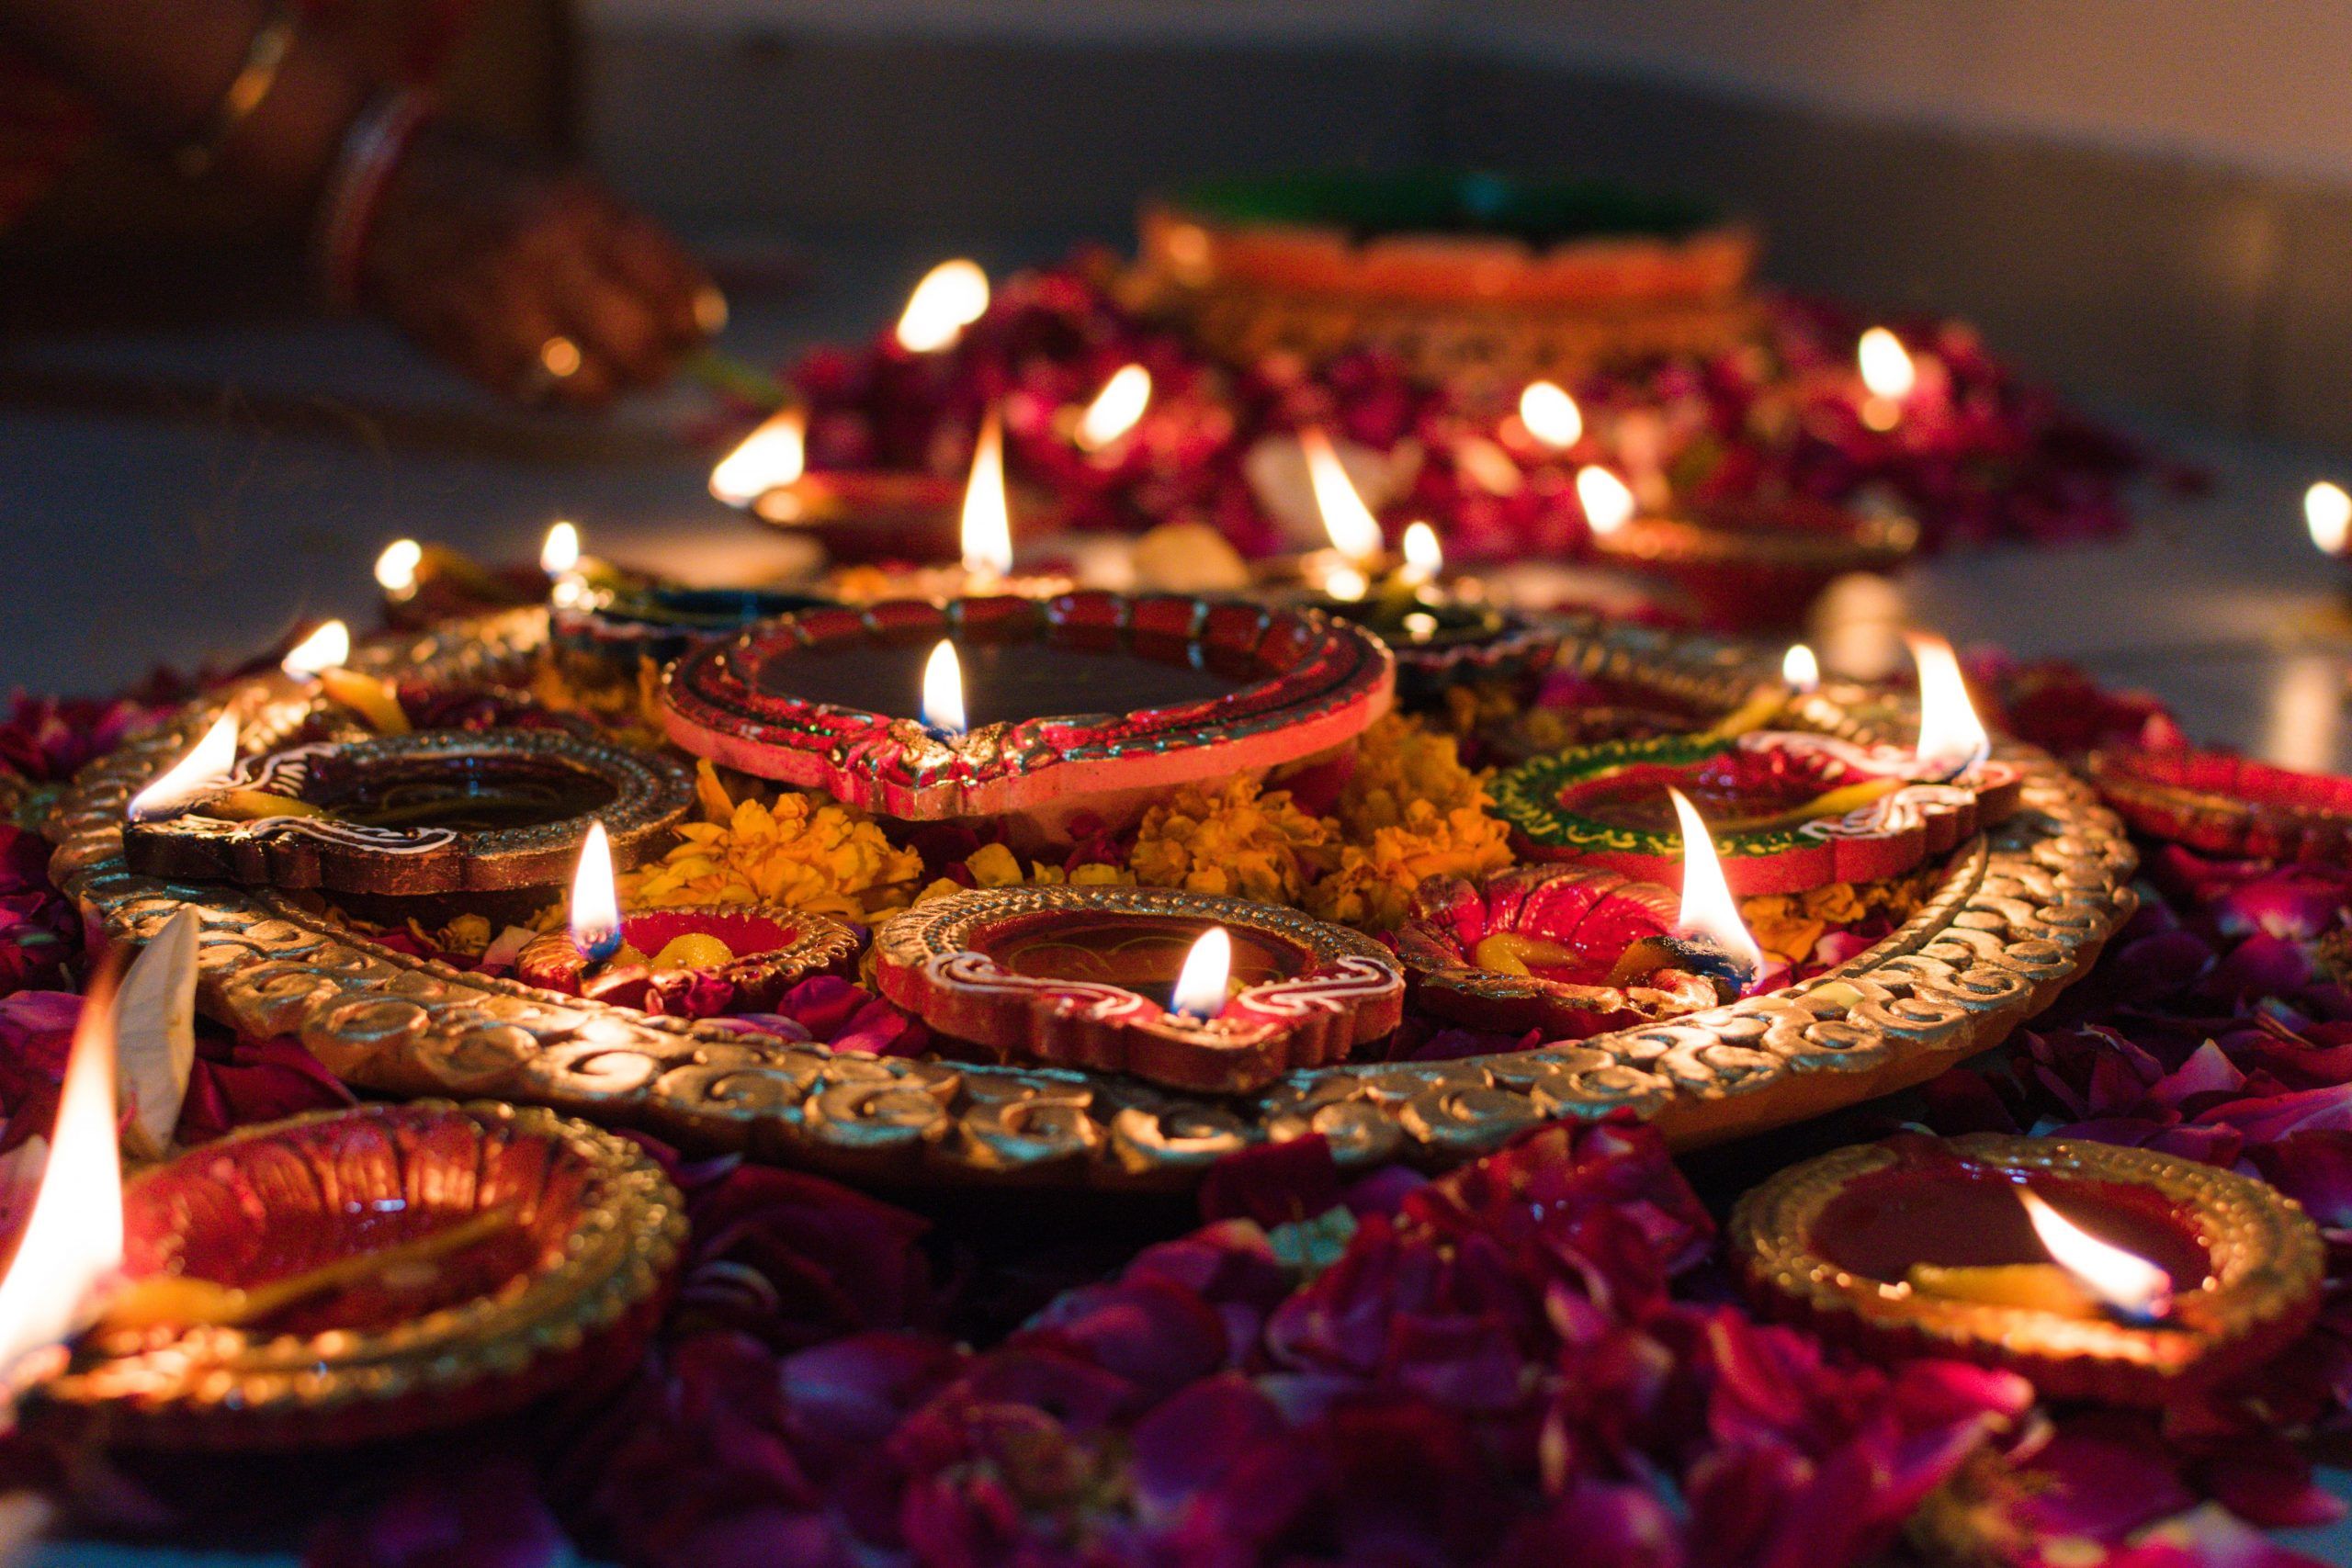 Diwali gift ideas for your loved ones this festive season